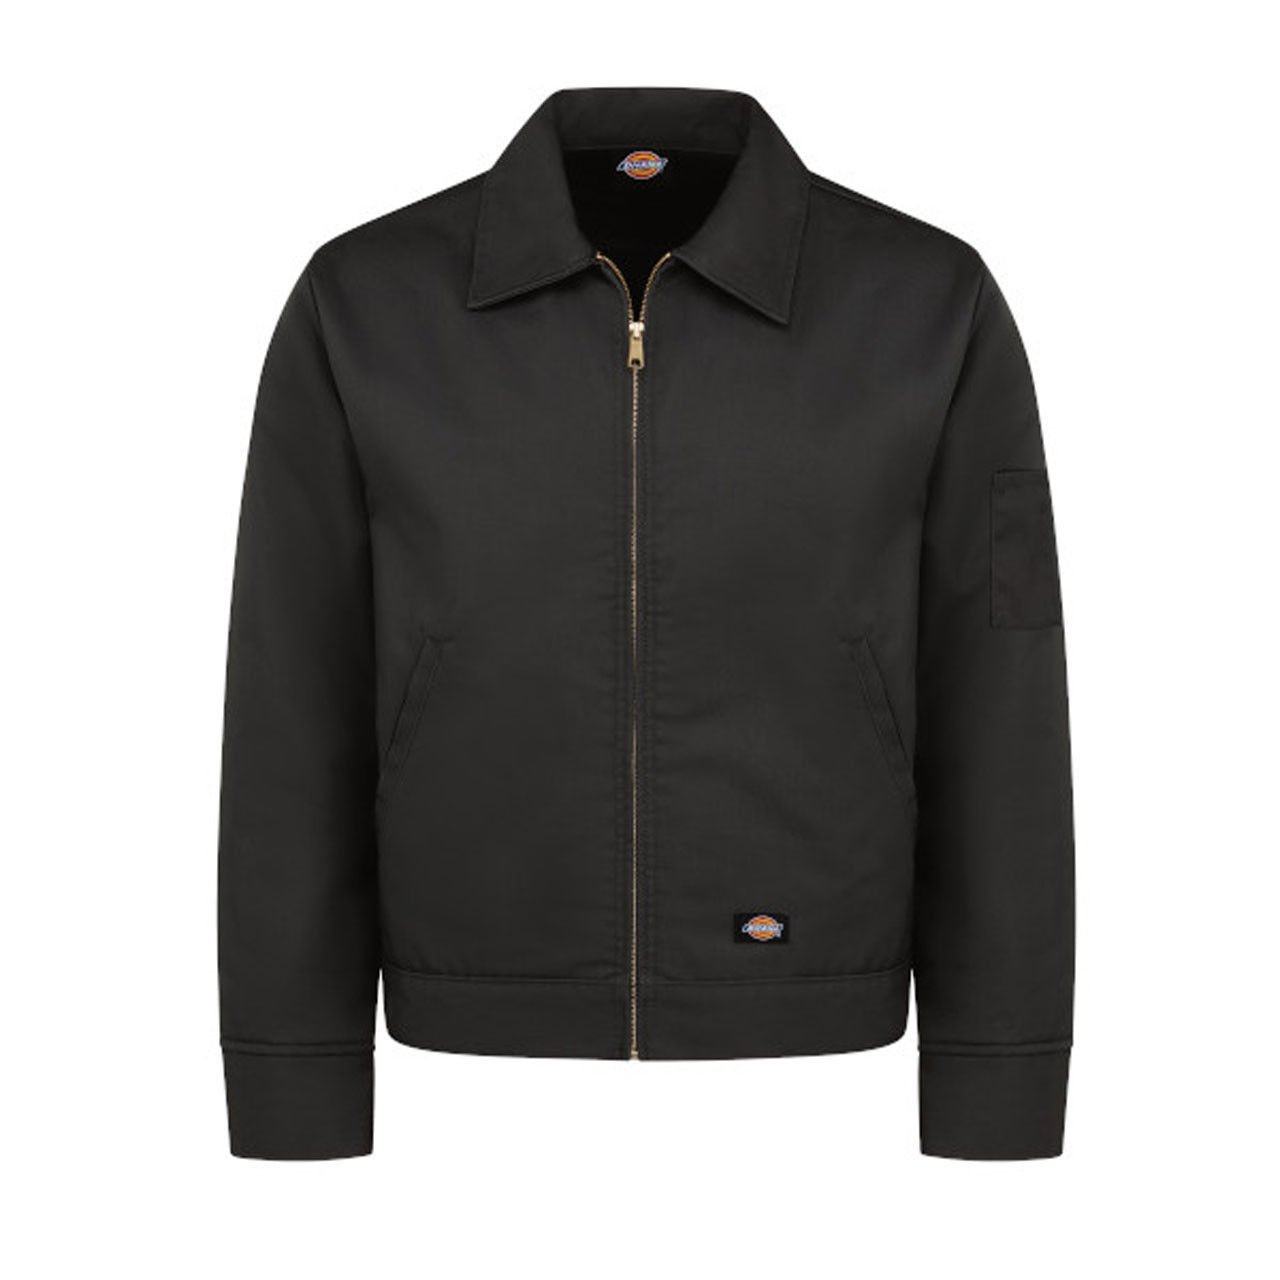 What color options does the black Dickies jacket come in?